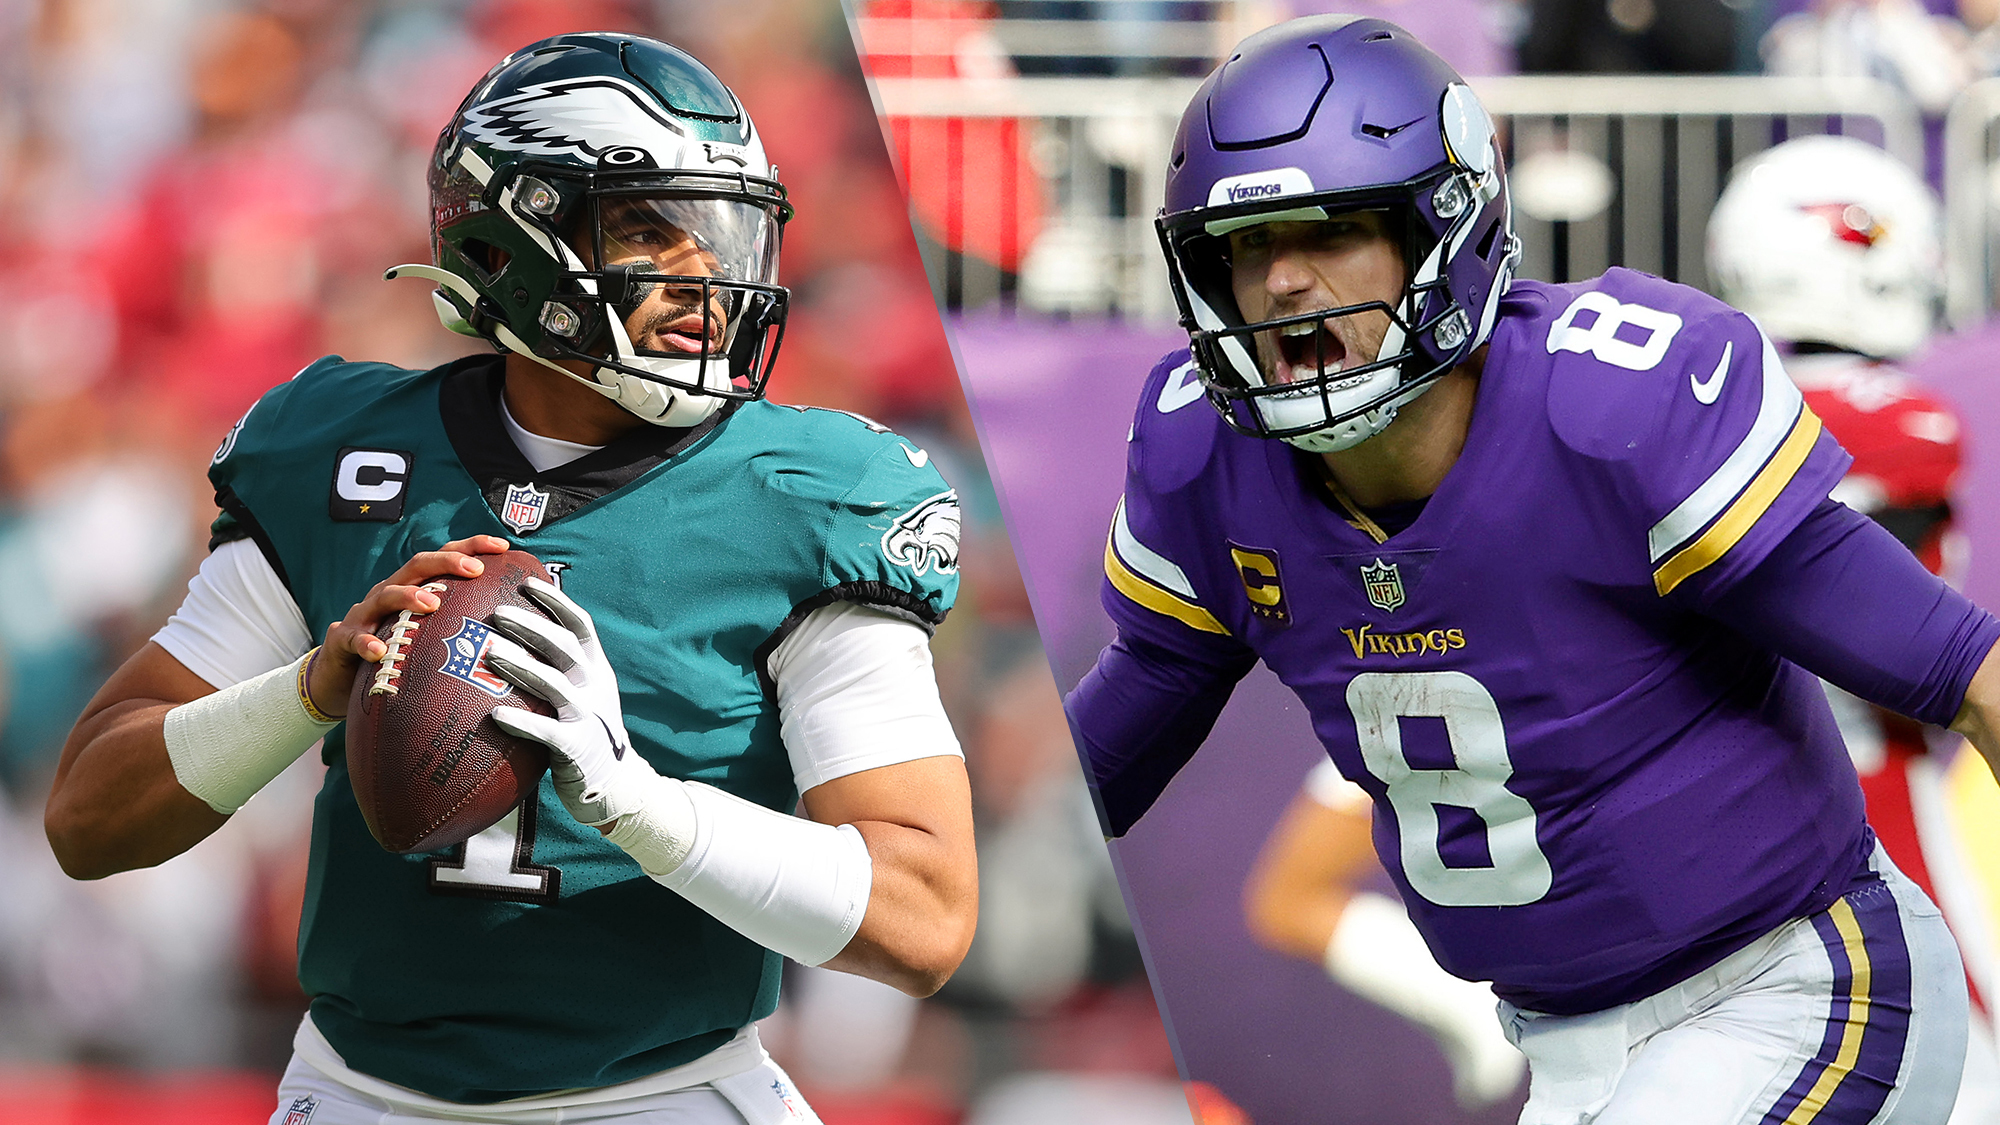 Vikings vs. Eagles live stream: How to watch NFL game online